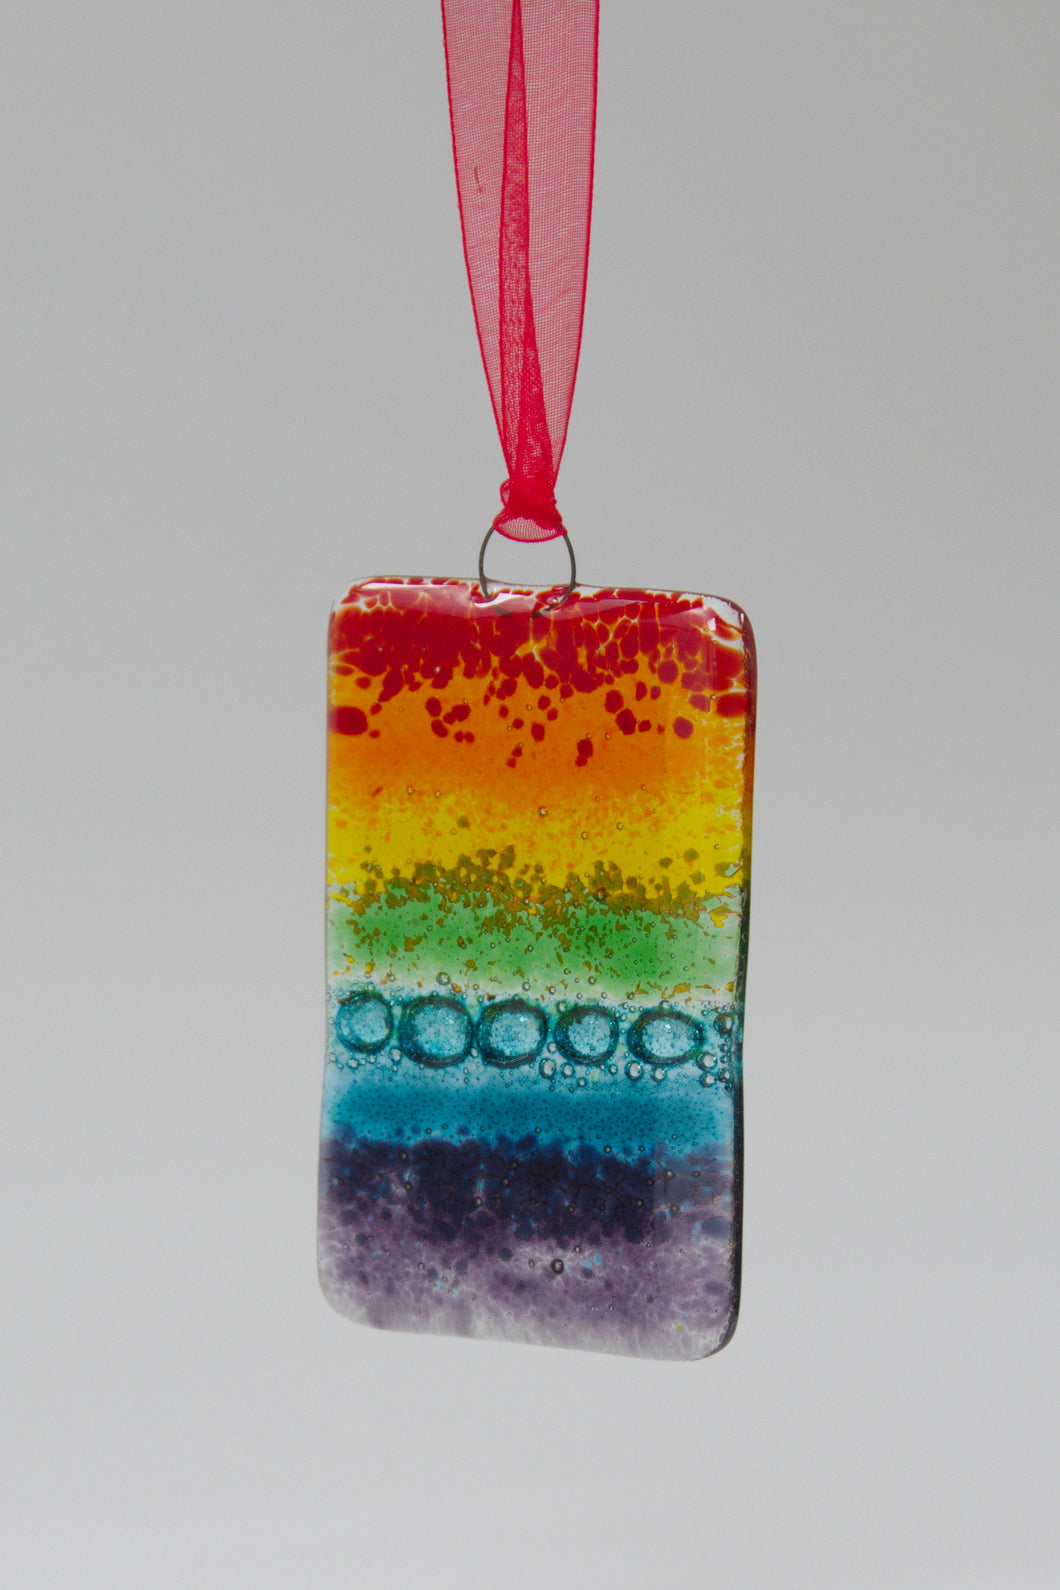 Small Rainbow hanging will bubble effect by Flow Glass Orkney Islands Scotland